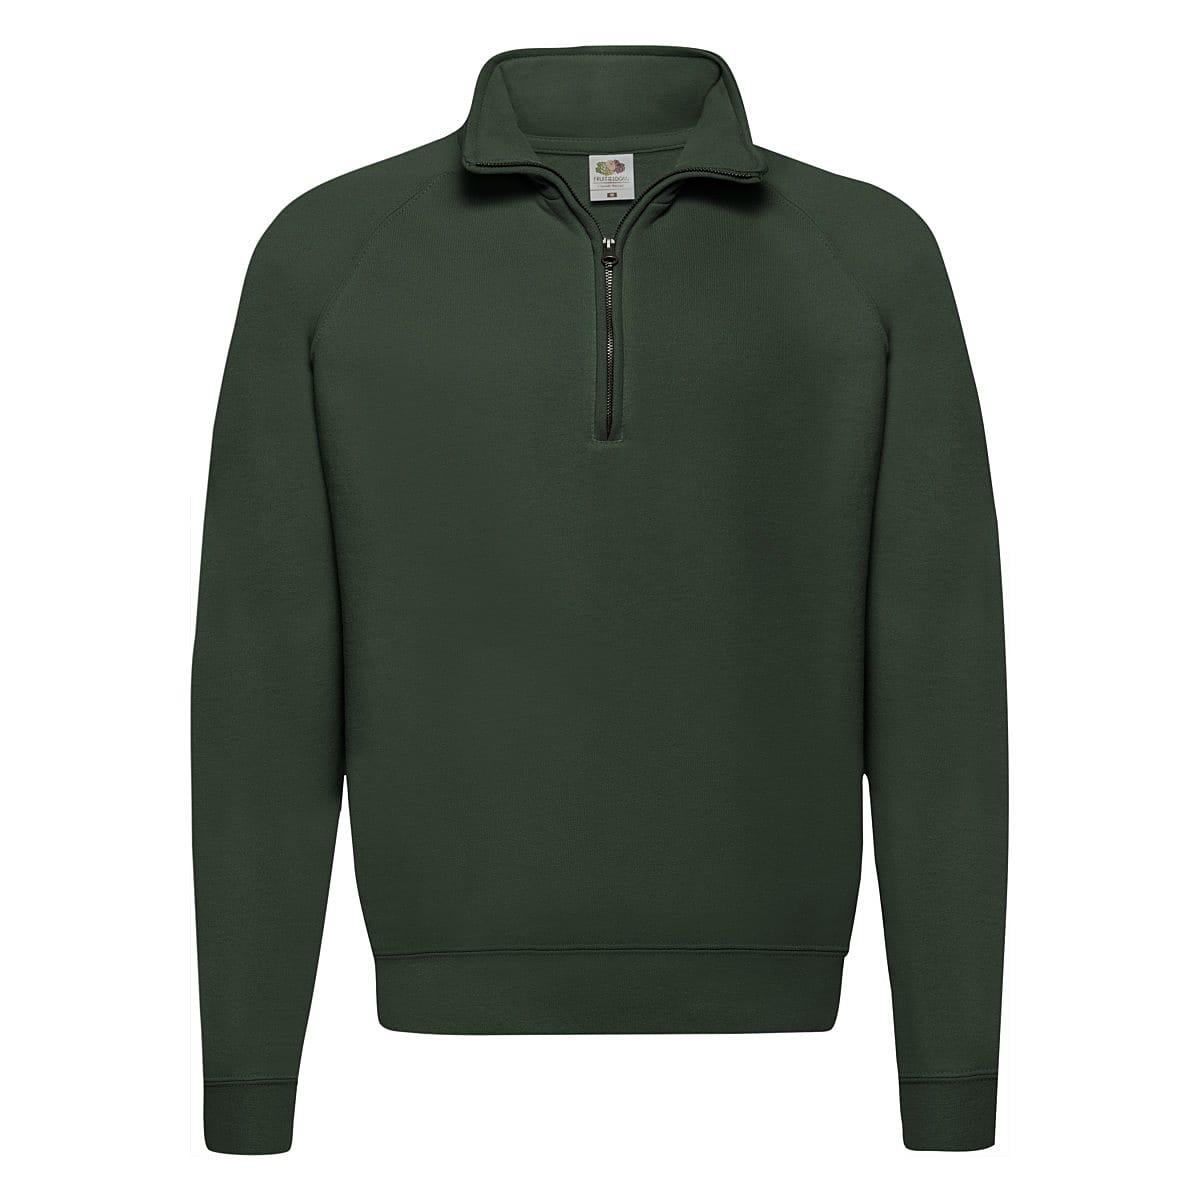 Fruit Of The Loom Mens Classic Zip Neck Sweater in Bottle Green (Product Code: 62114)